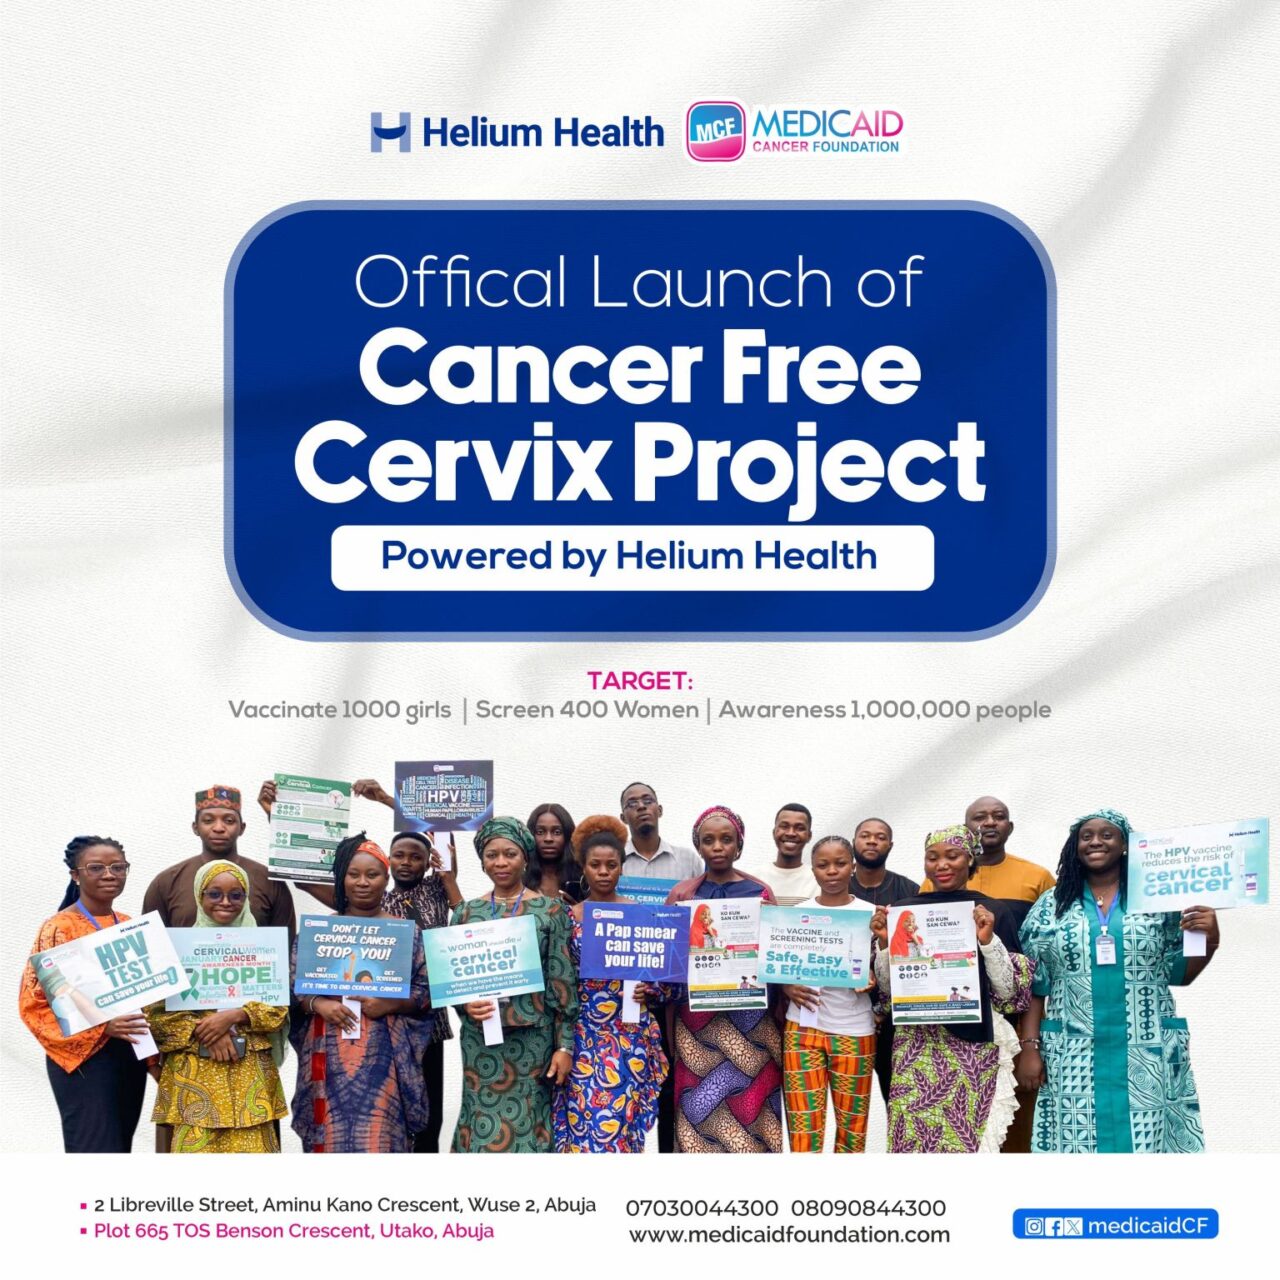 Medicaid Cancer Foundation announces Cancer Free Cervix Project